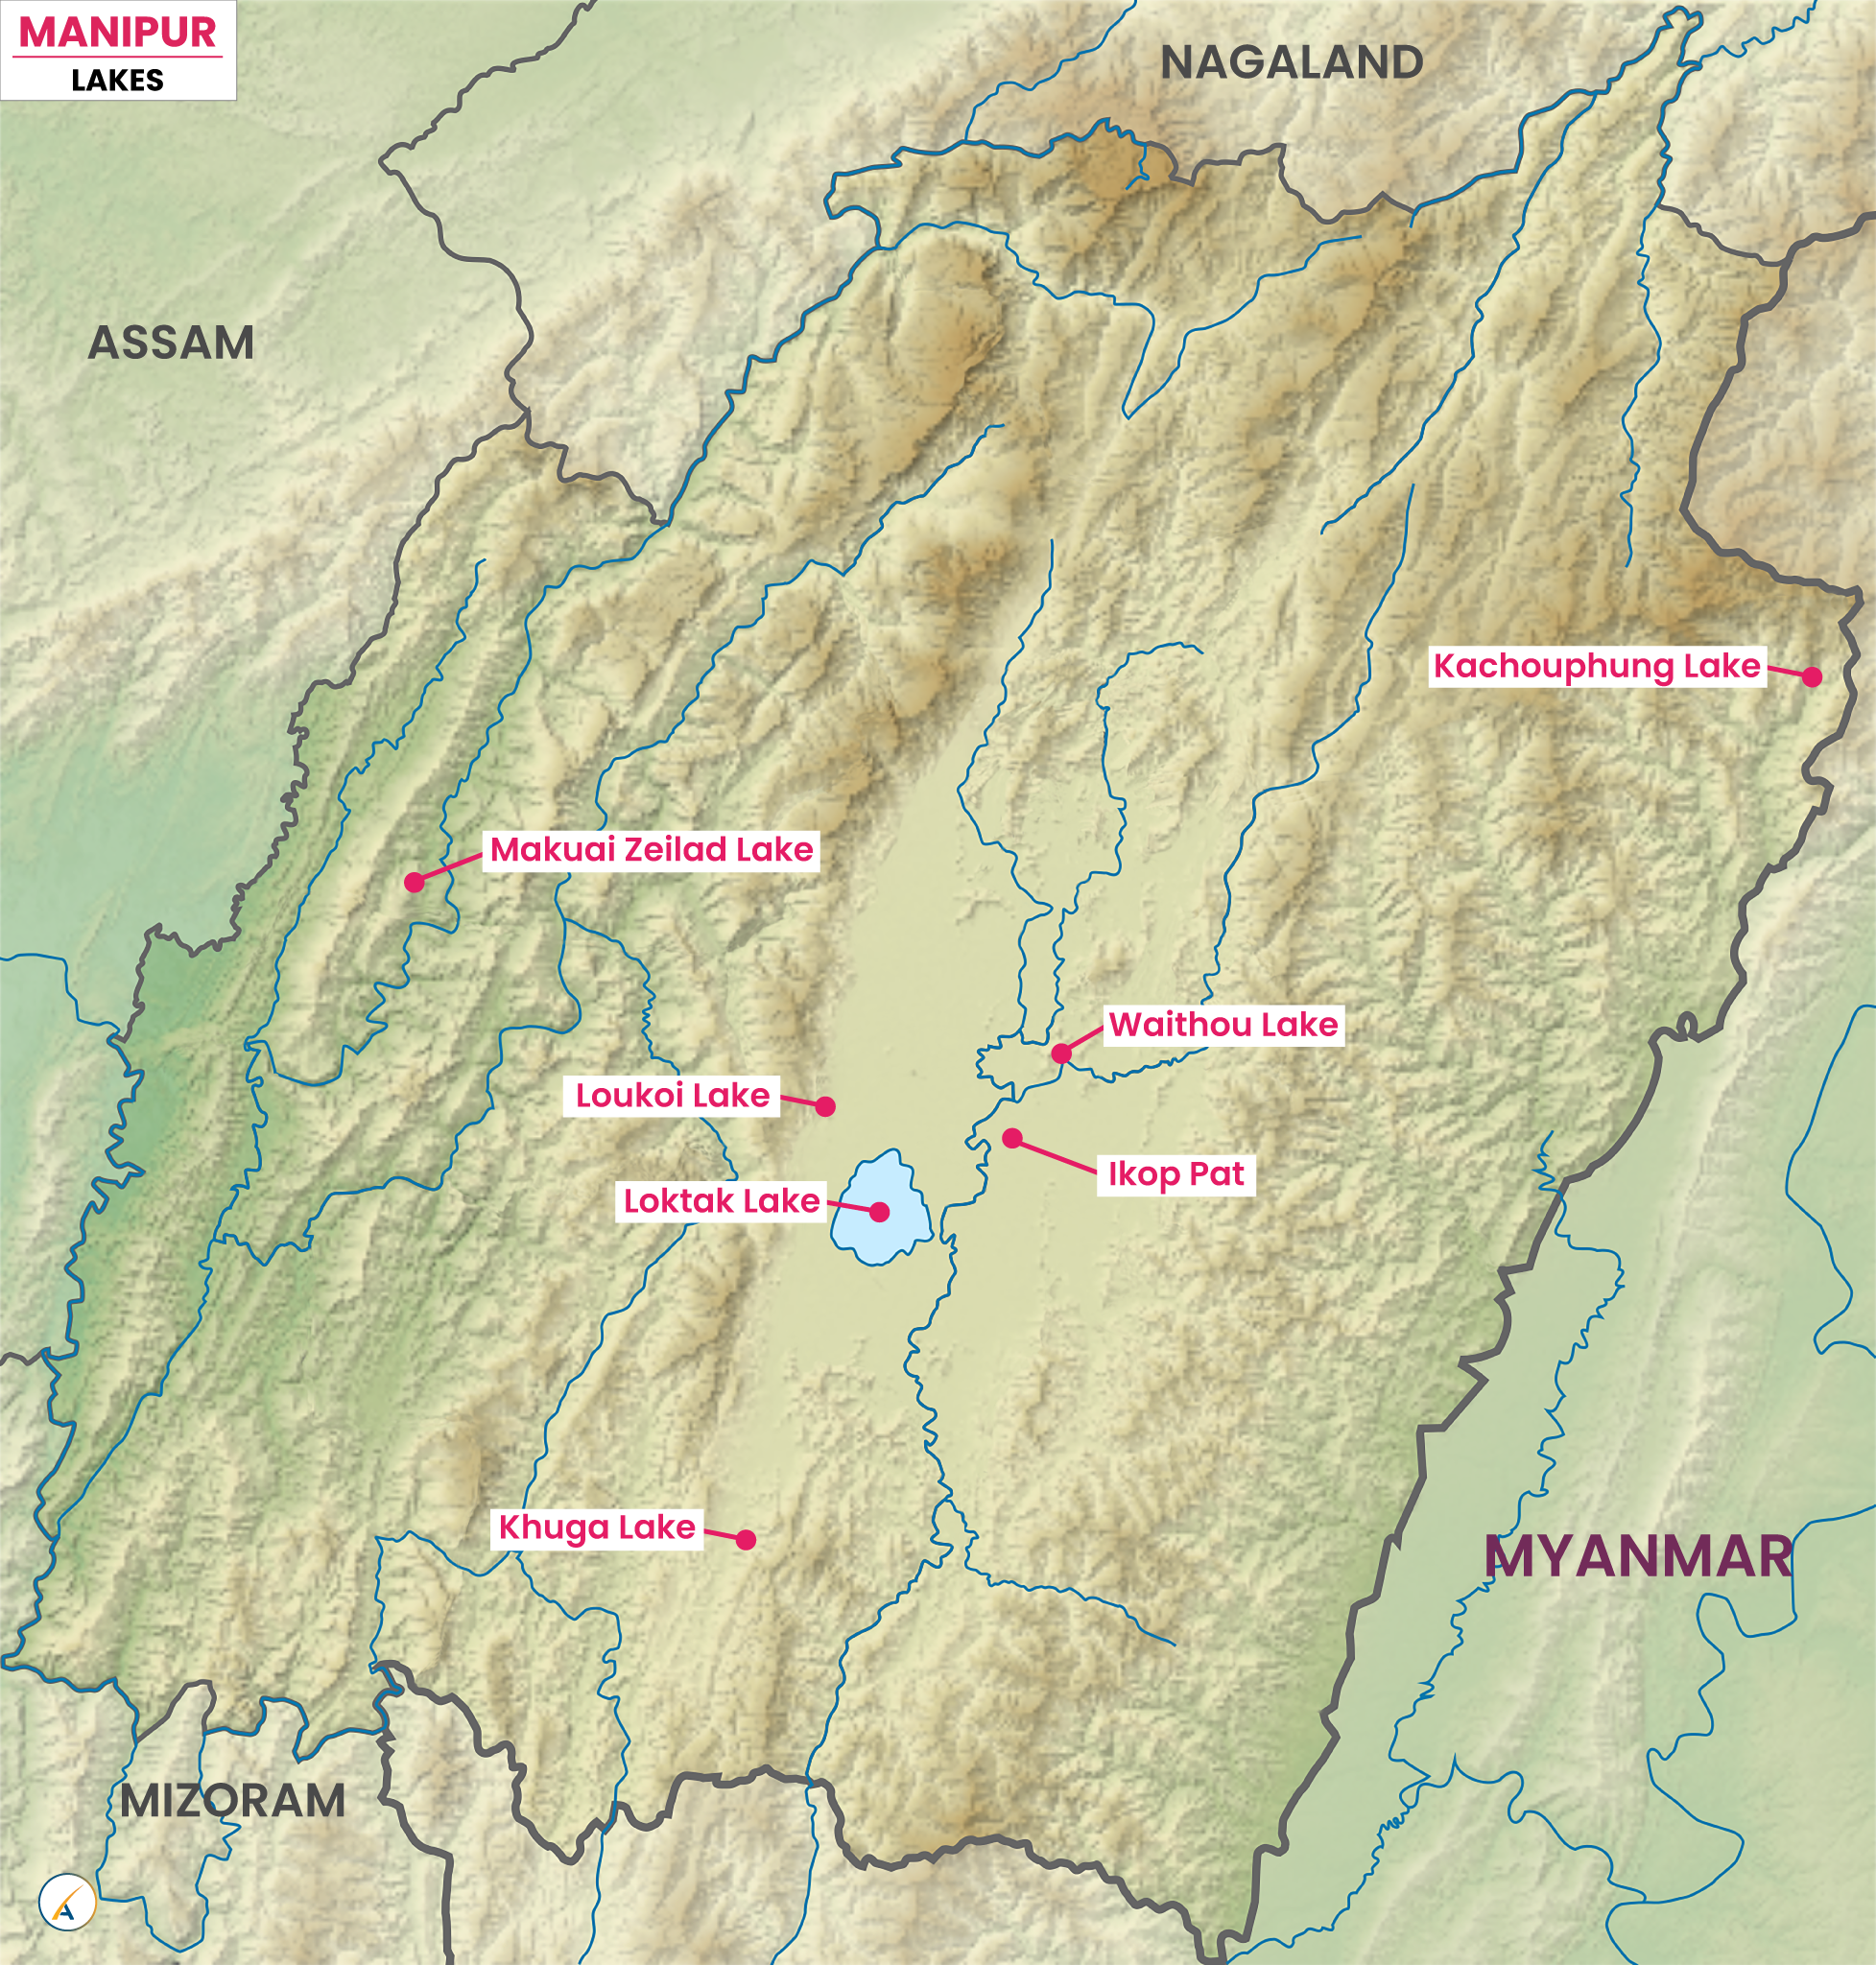 Lakes in Manipur